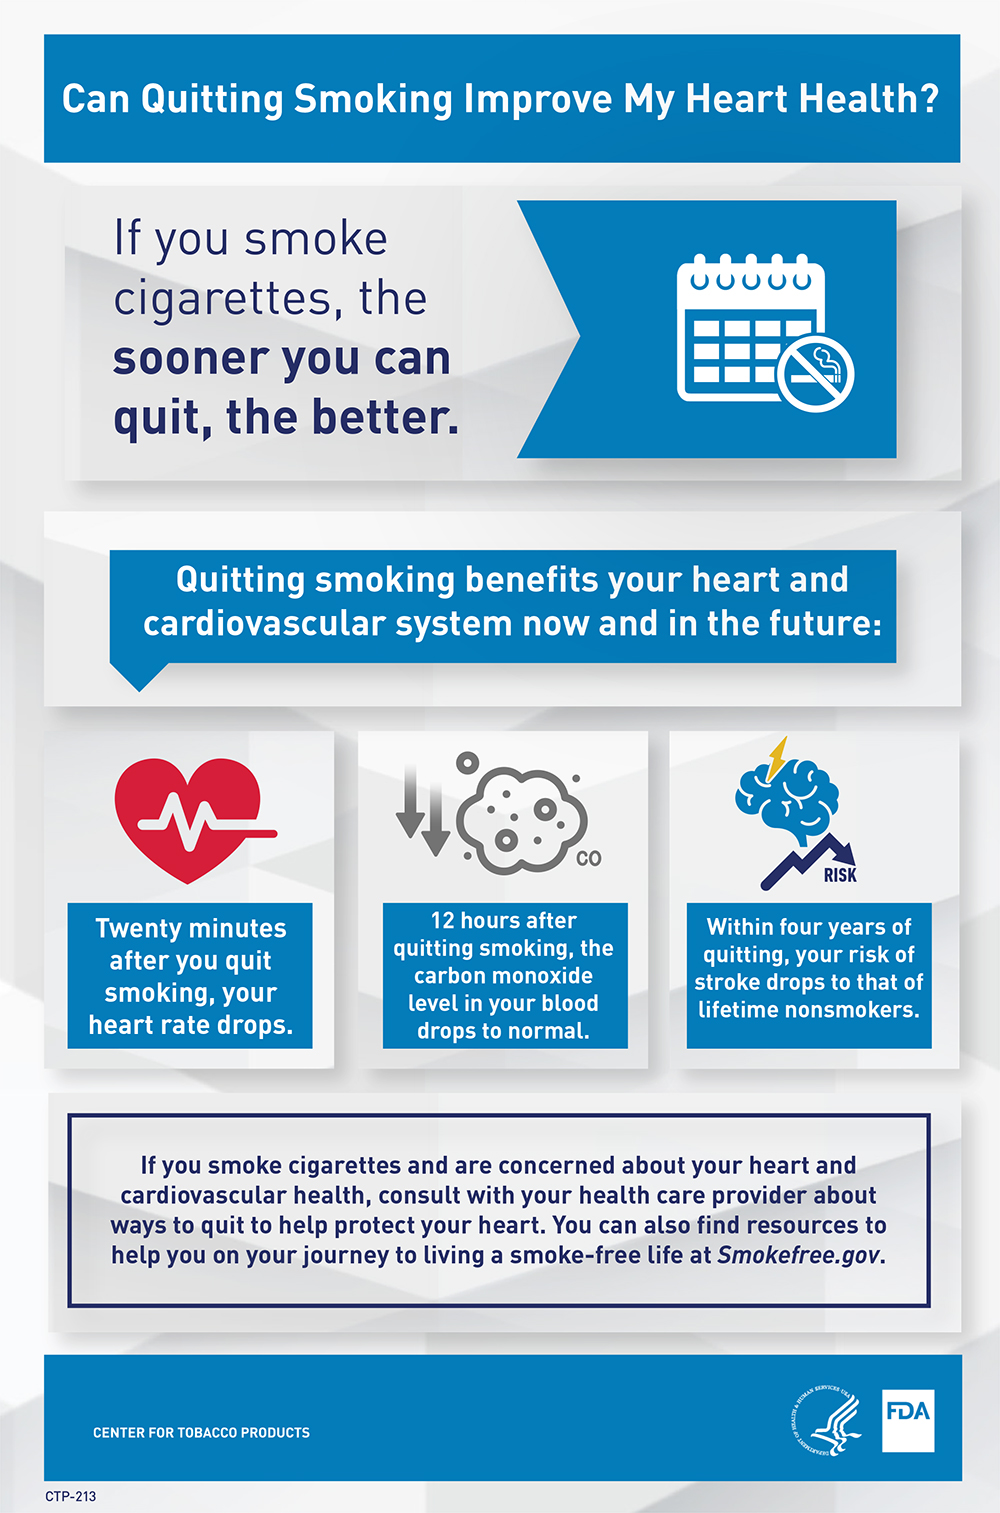 CTP - Heart Health - Infographic - English - Wide